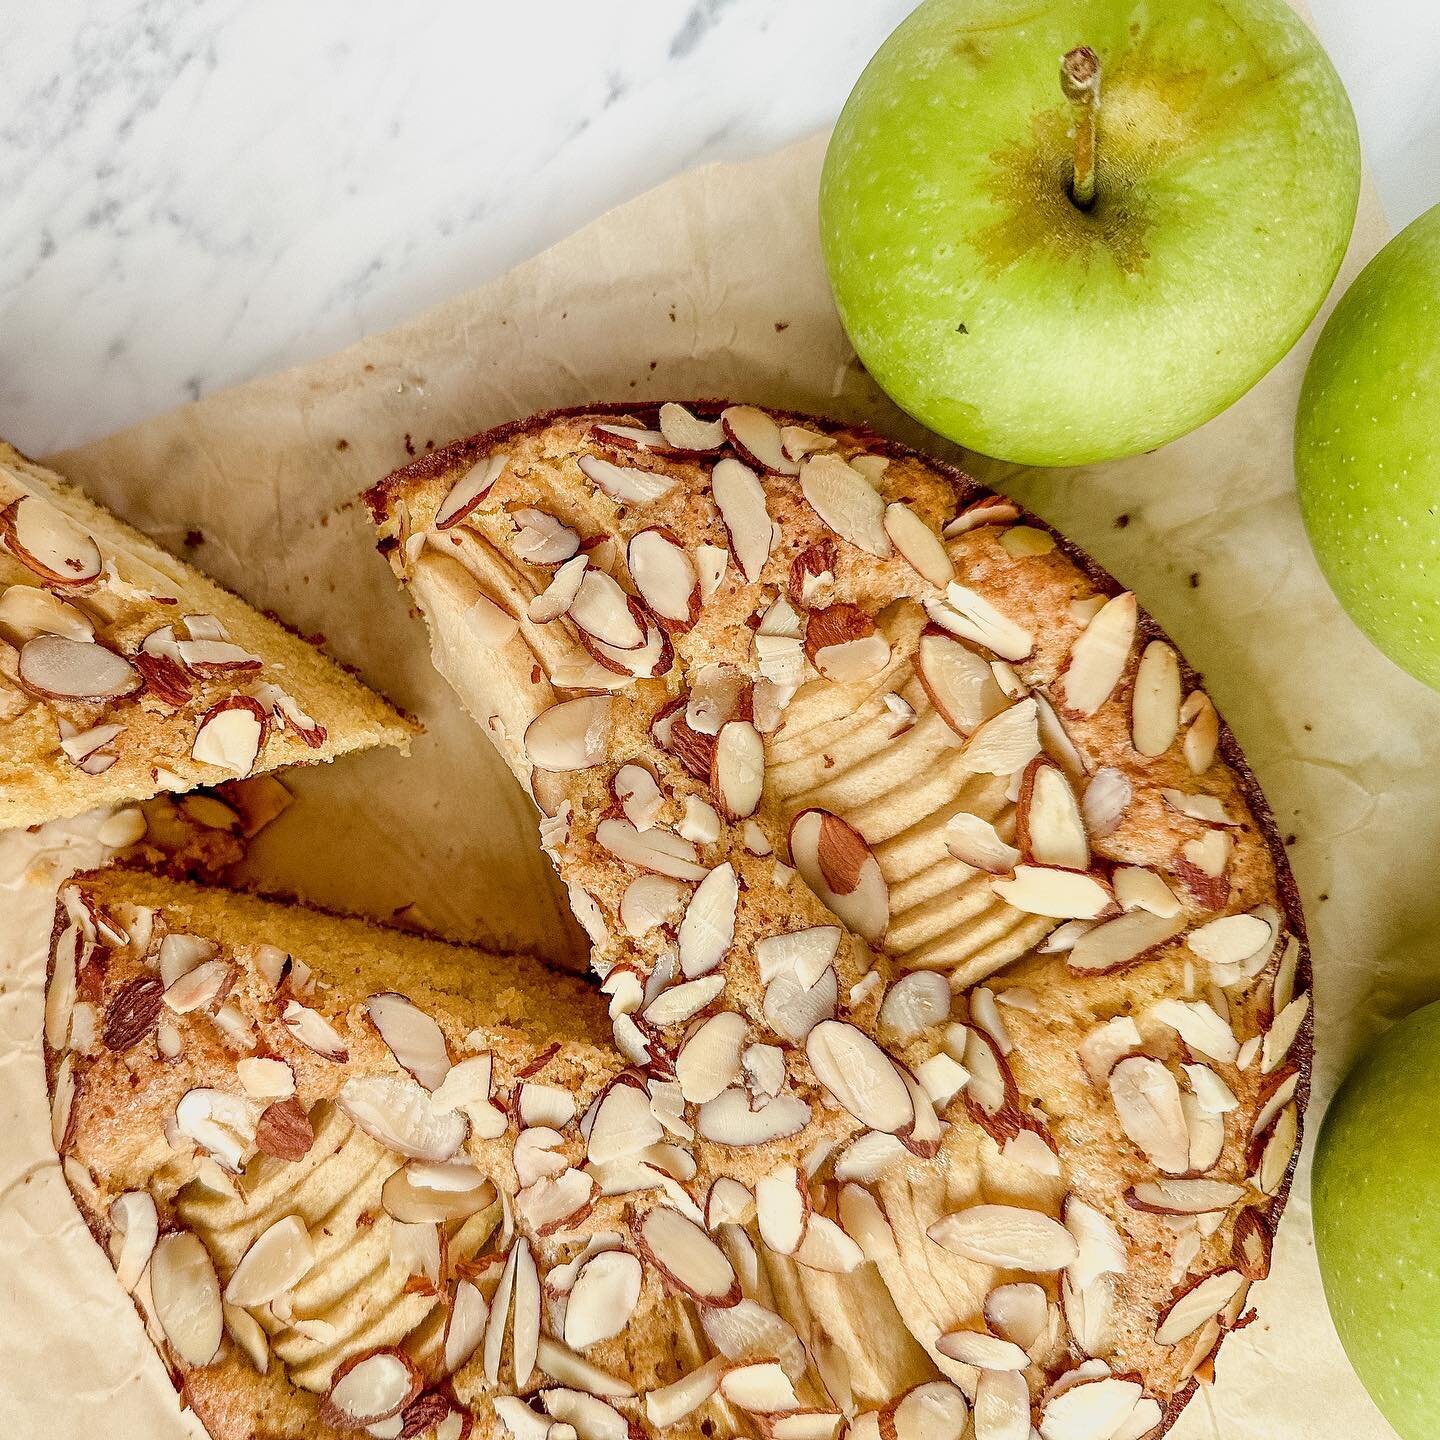 Easy apple and almond cake. 

Cinnamon isn&rsquo;t apple&rsquo;s only flavor friend. Get this no-mixer-needed recipe in my newsletter. (Link in bio!)

Elevate this simple bake by using @janiesmill golden sifted durum flour. 

#baking #recipe #apple #